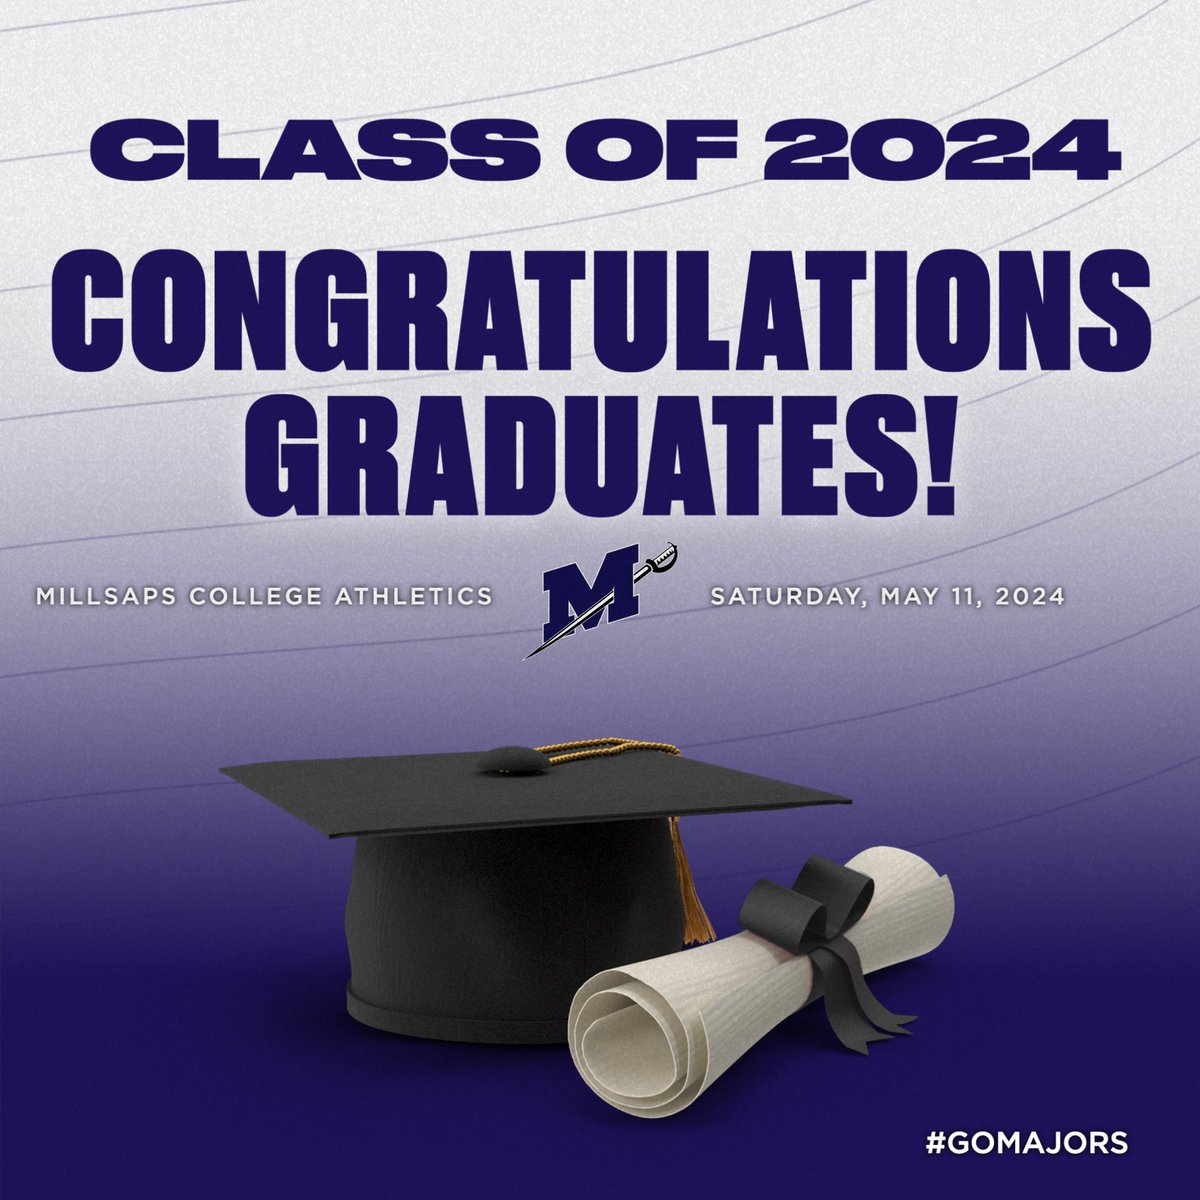 Class of 2024, today is your day! 🎉🎓

Congratulations from all of us at Millsaps College Athletics! 👏

#GoMajors